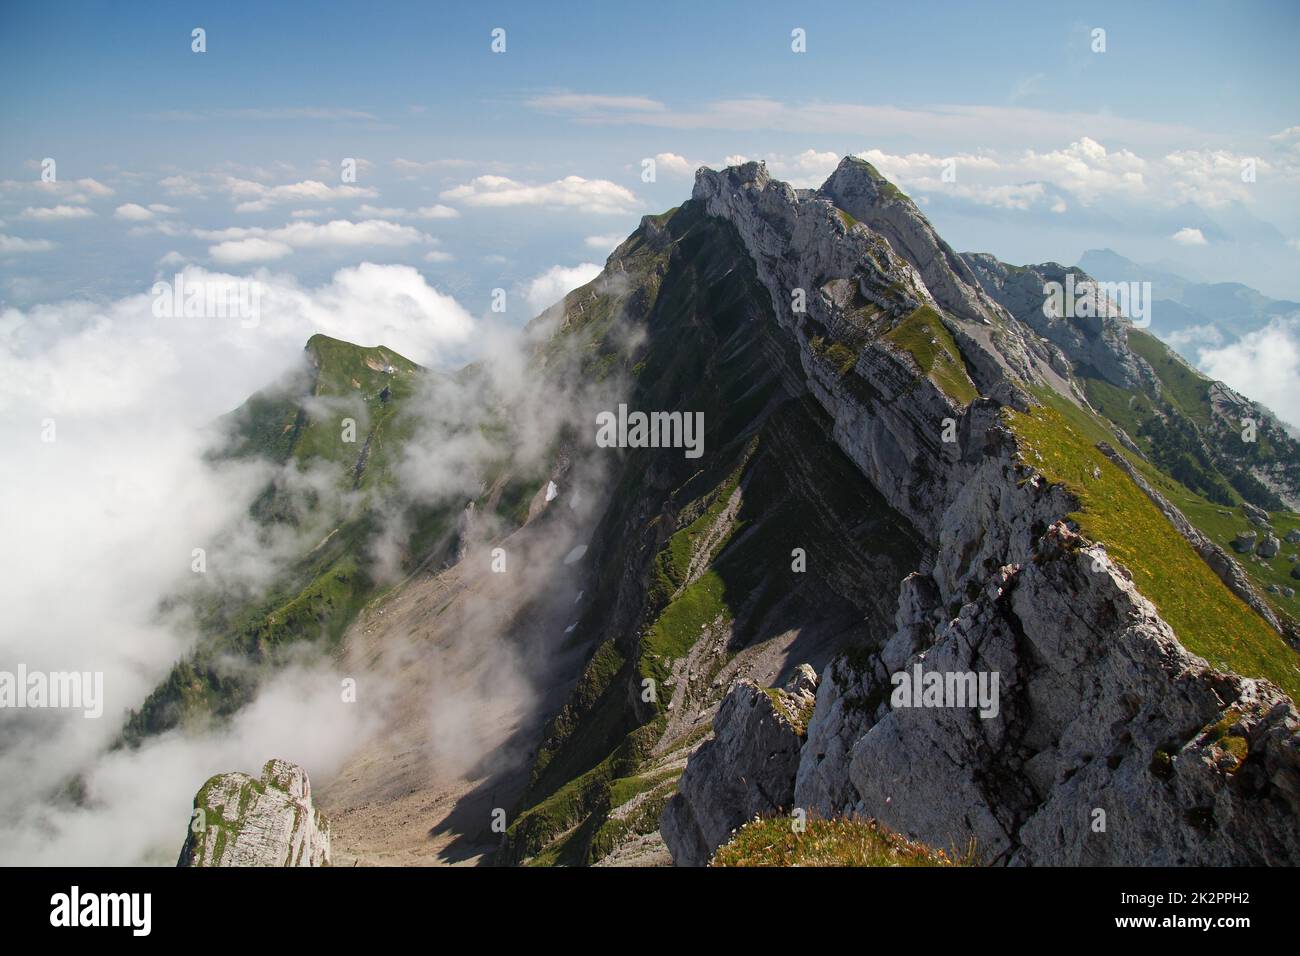 Alpine mountain landscape with clouds in Switzerland Stock Photo